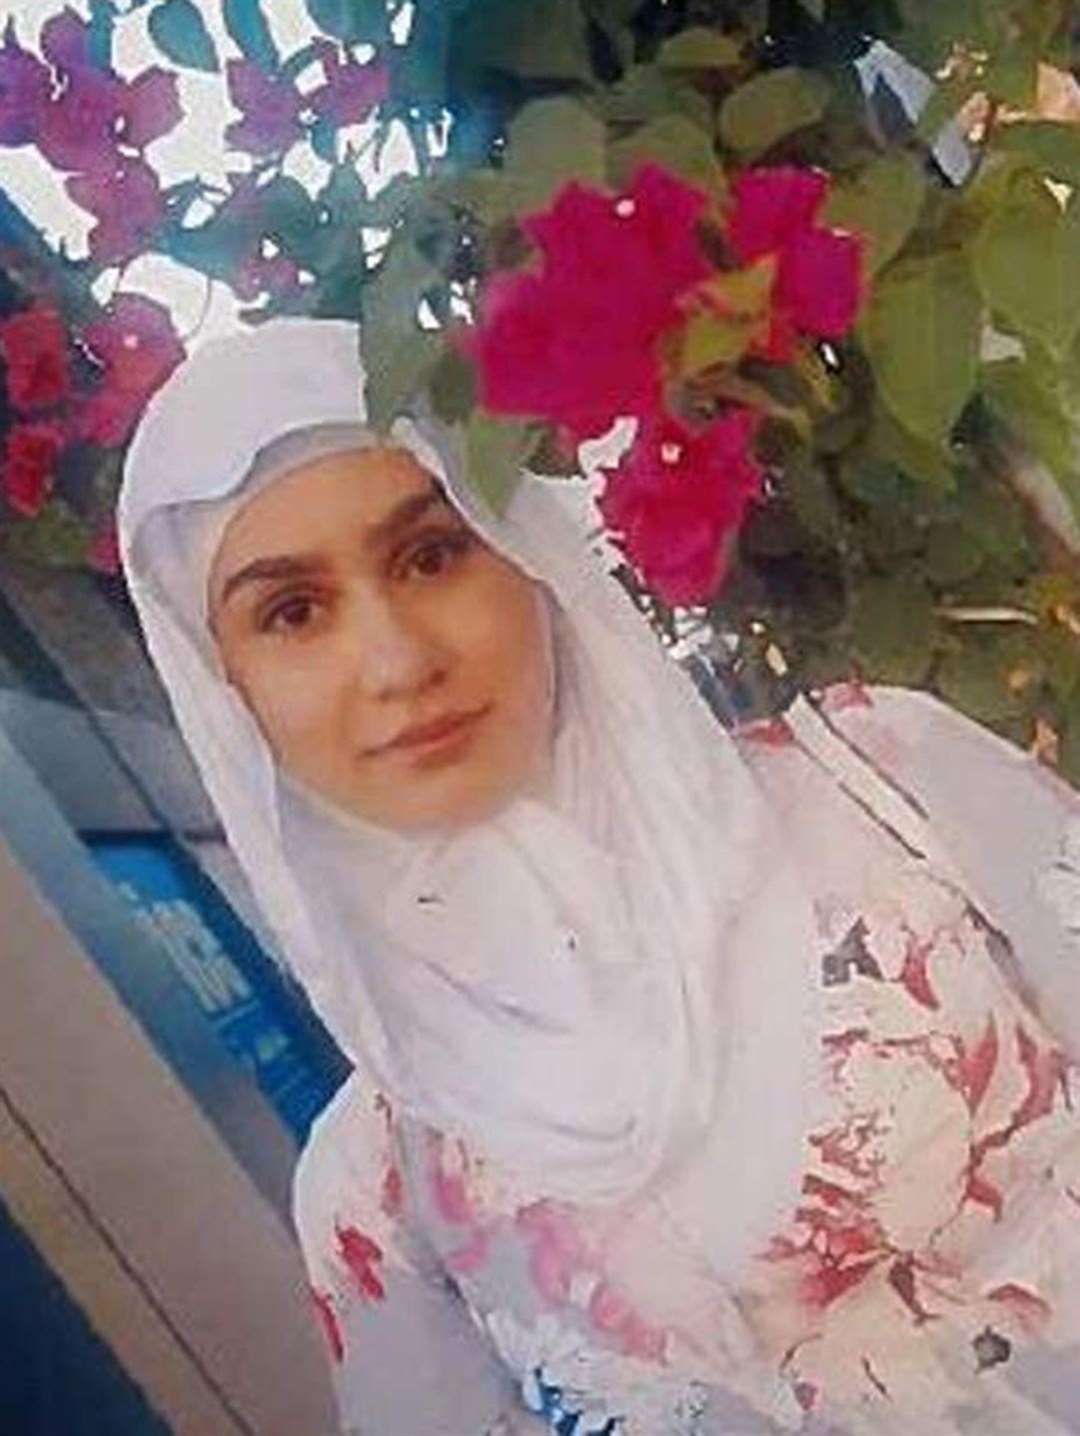 Aya Hachem was shot while en route to buy food for her family (Lancs Police/PA)